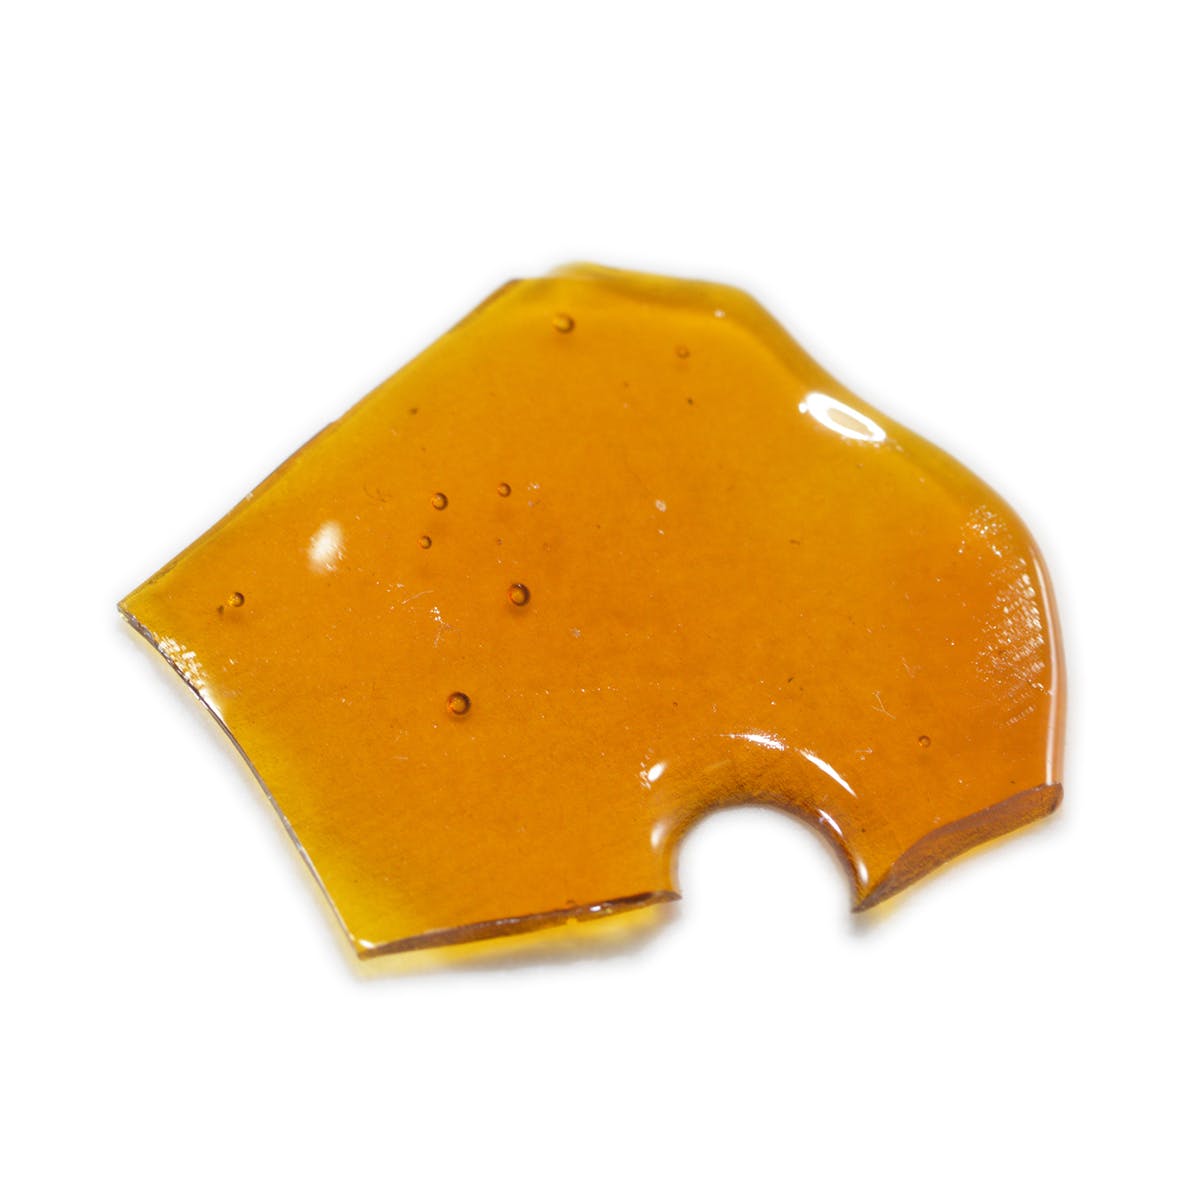 Sour Bubba Shatter